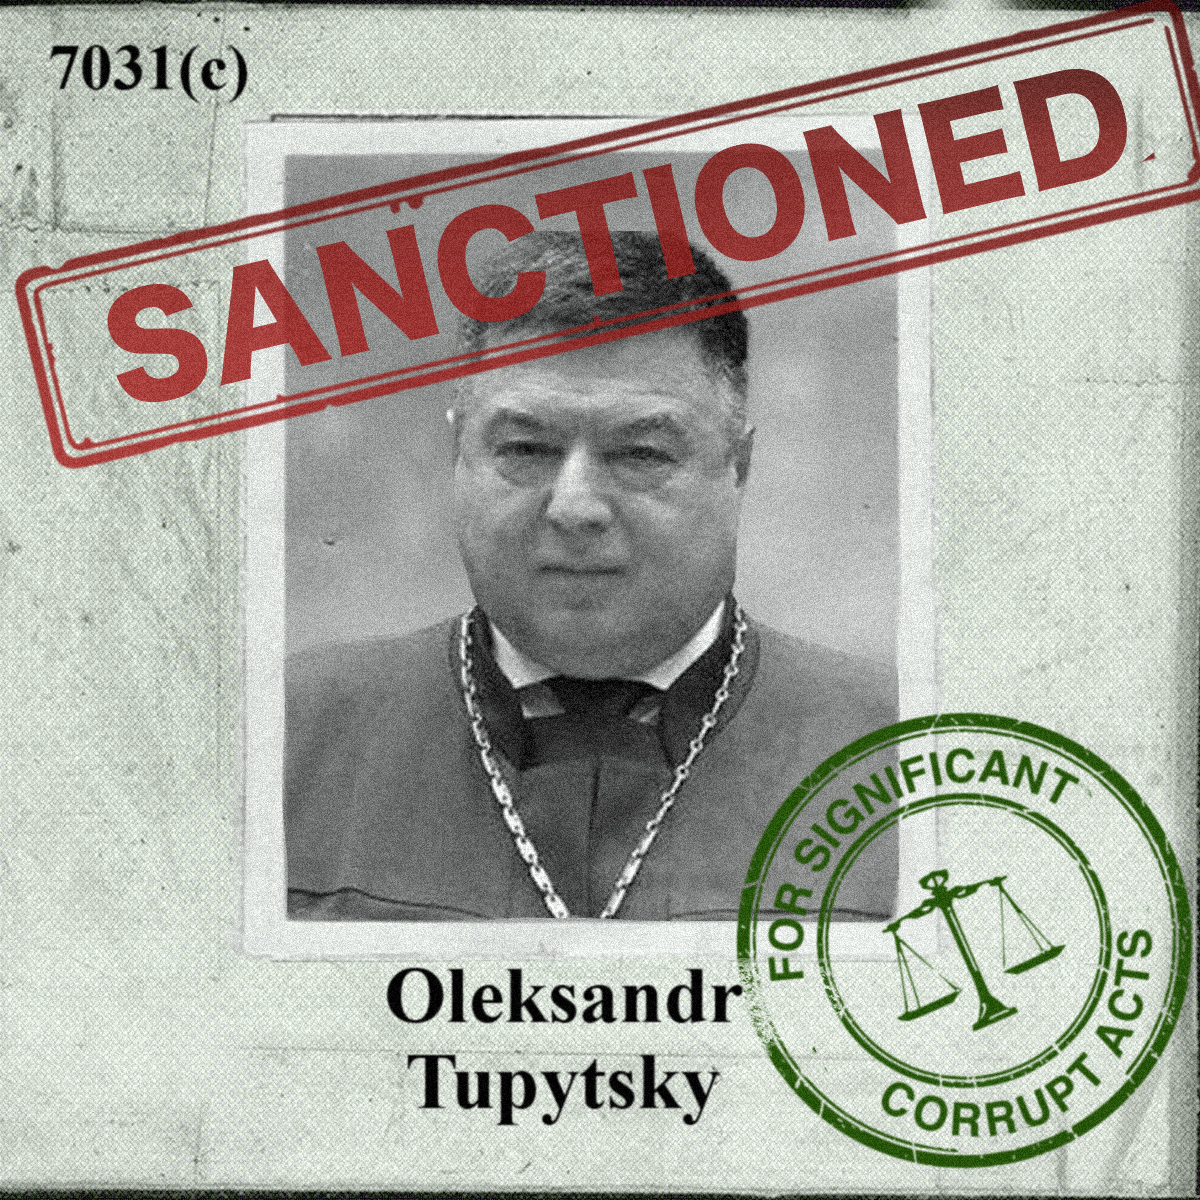 The Department of State is designating Oleksandr Tupitskyi for significant corrupt acts, including acceptance of a bribe while serving in the Ukrainian judiciary. His spouse was also designated